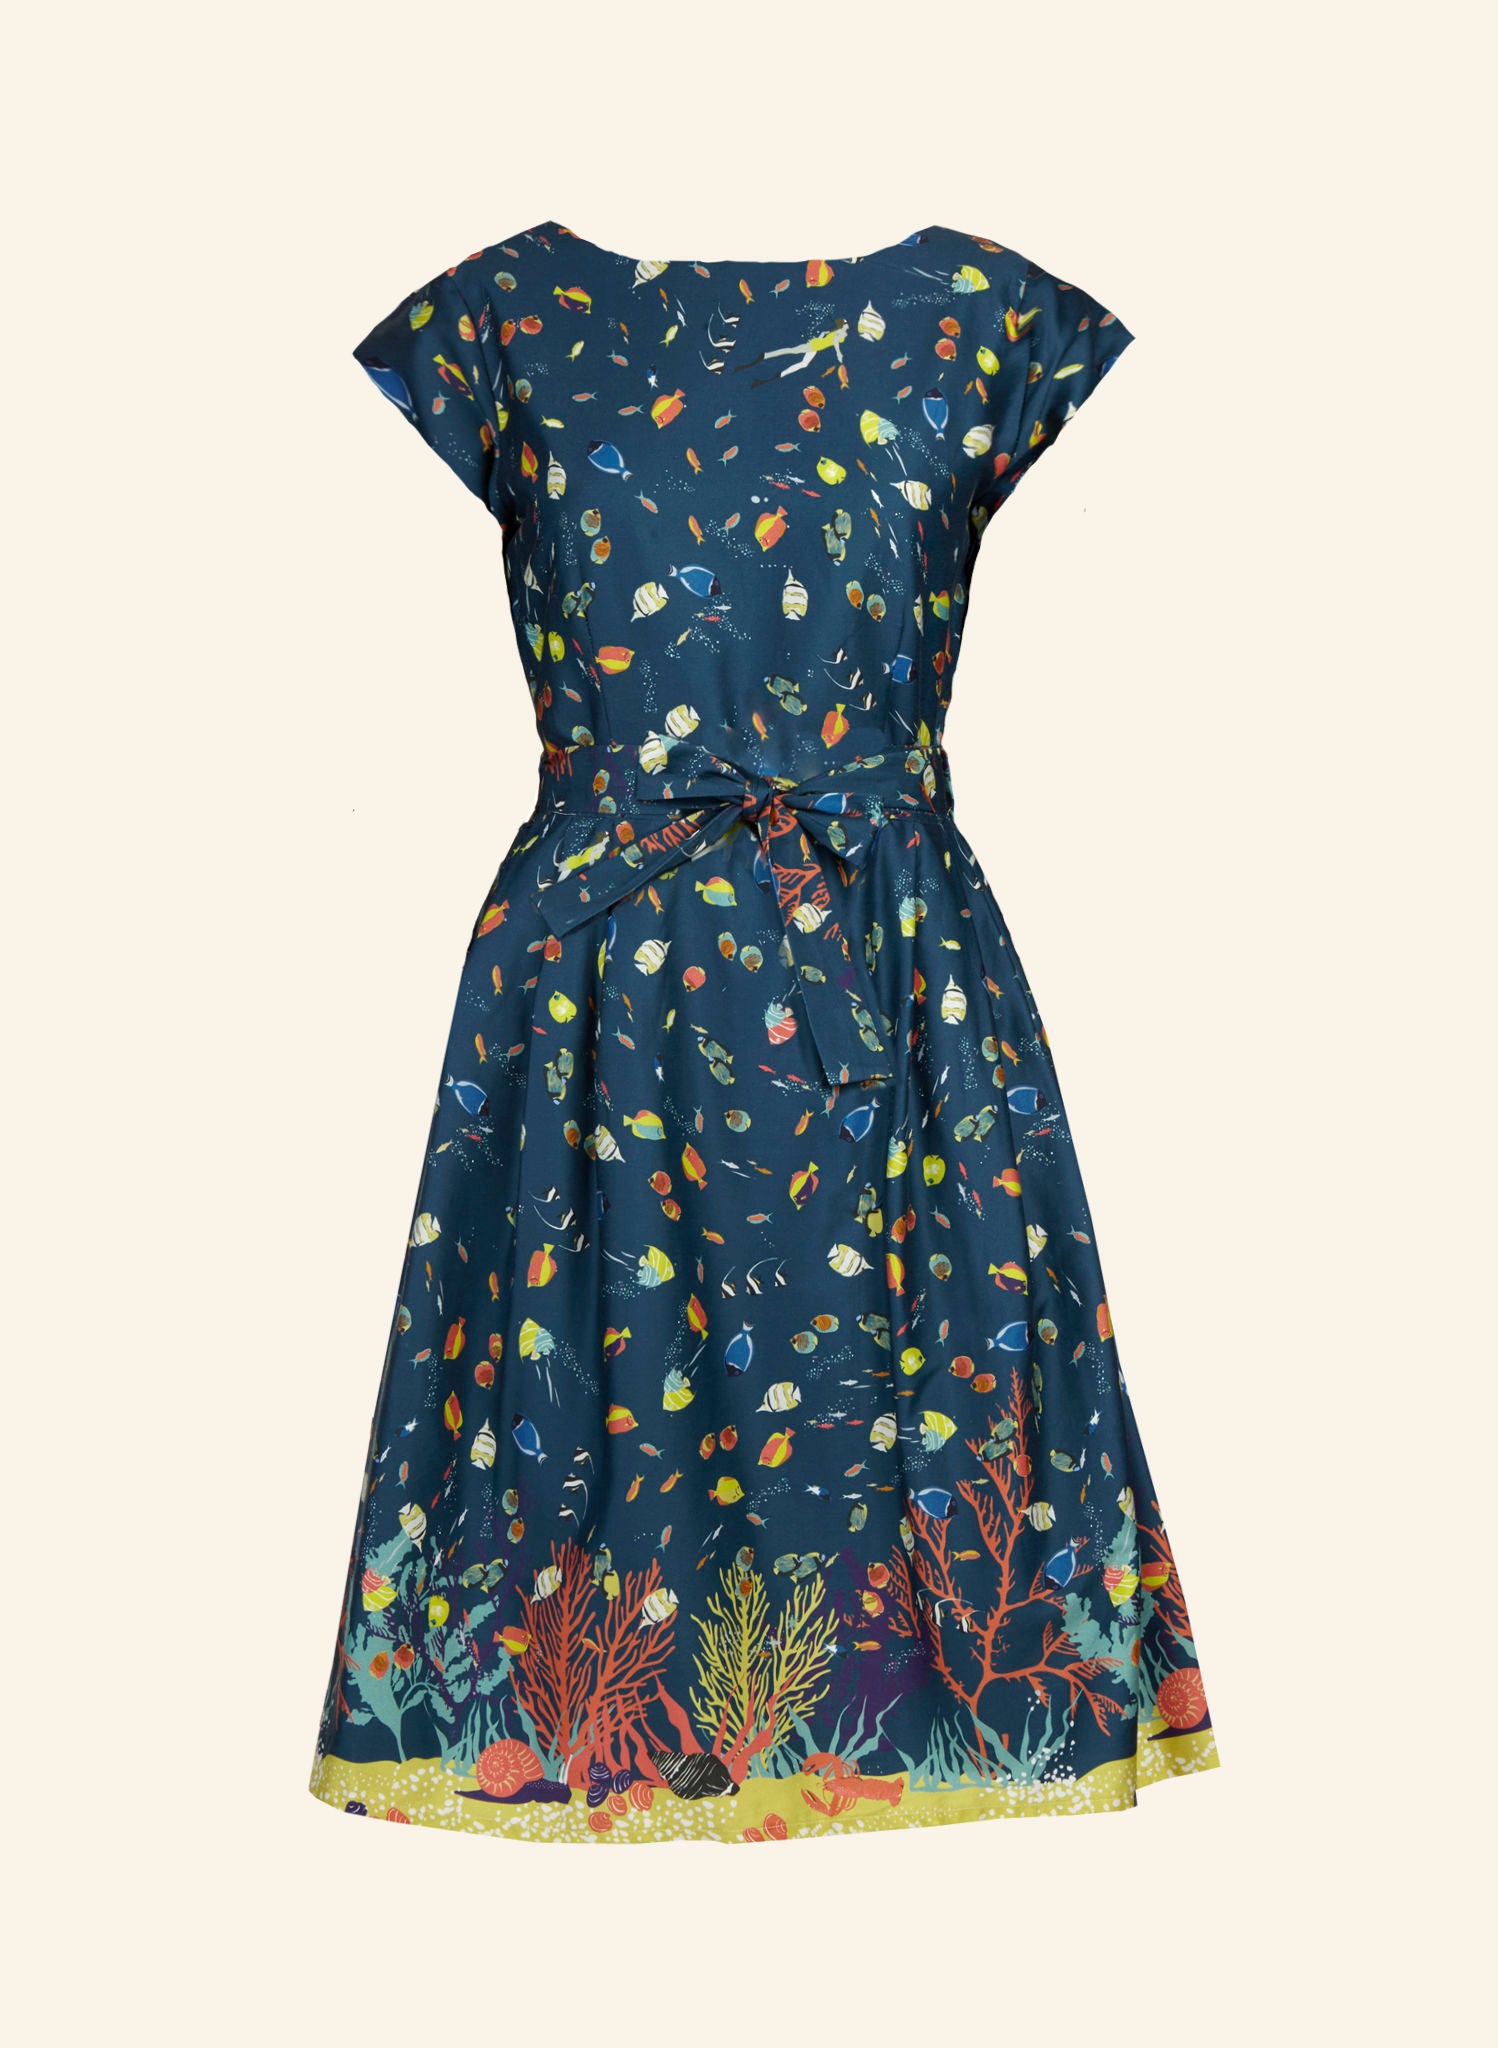 Beatrice Dress - Teal Under The Sea